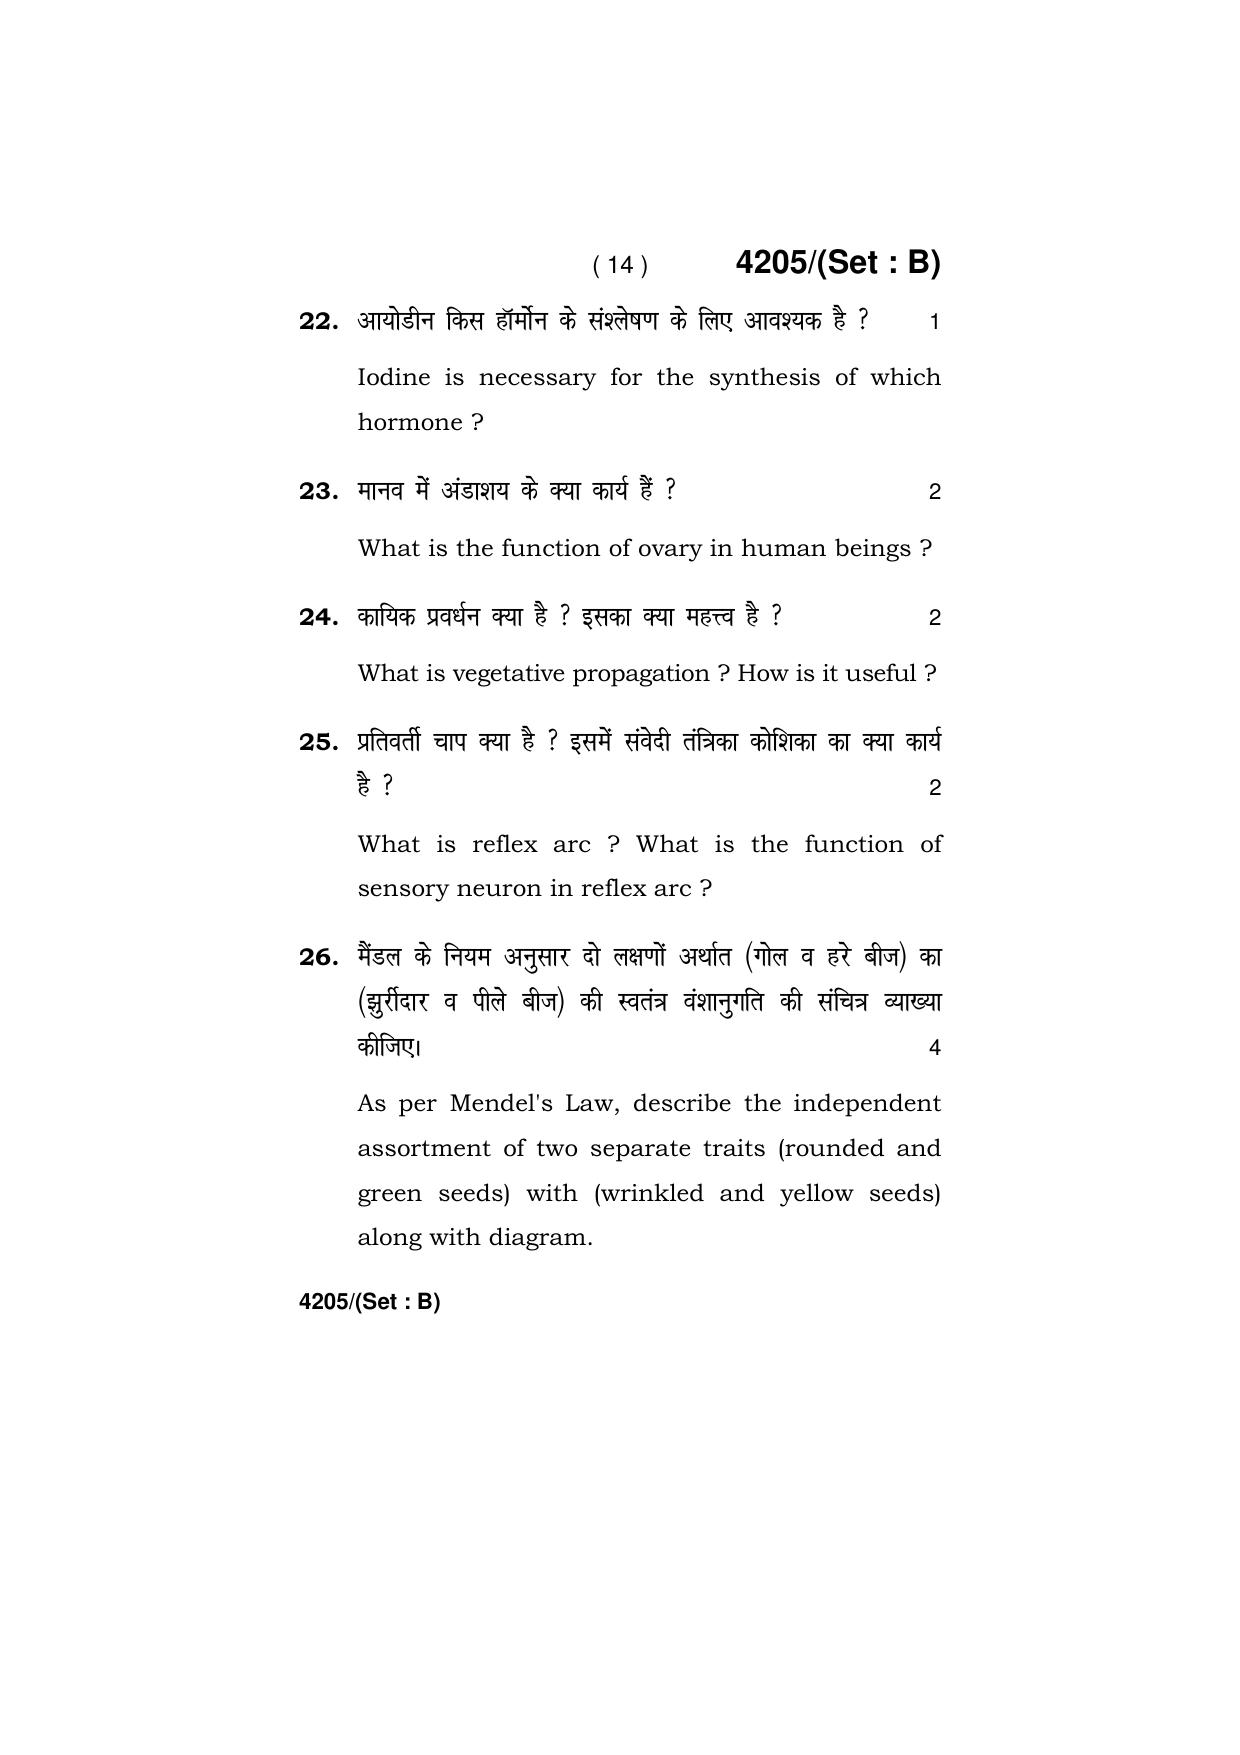 Haryana Board HBSE Class 10 Science (All Set) 2019 Question Paper - Page 30